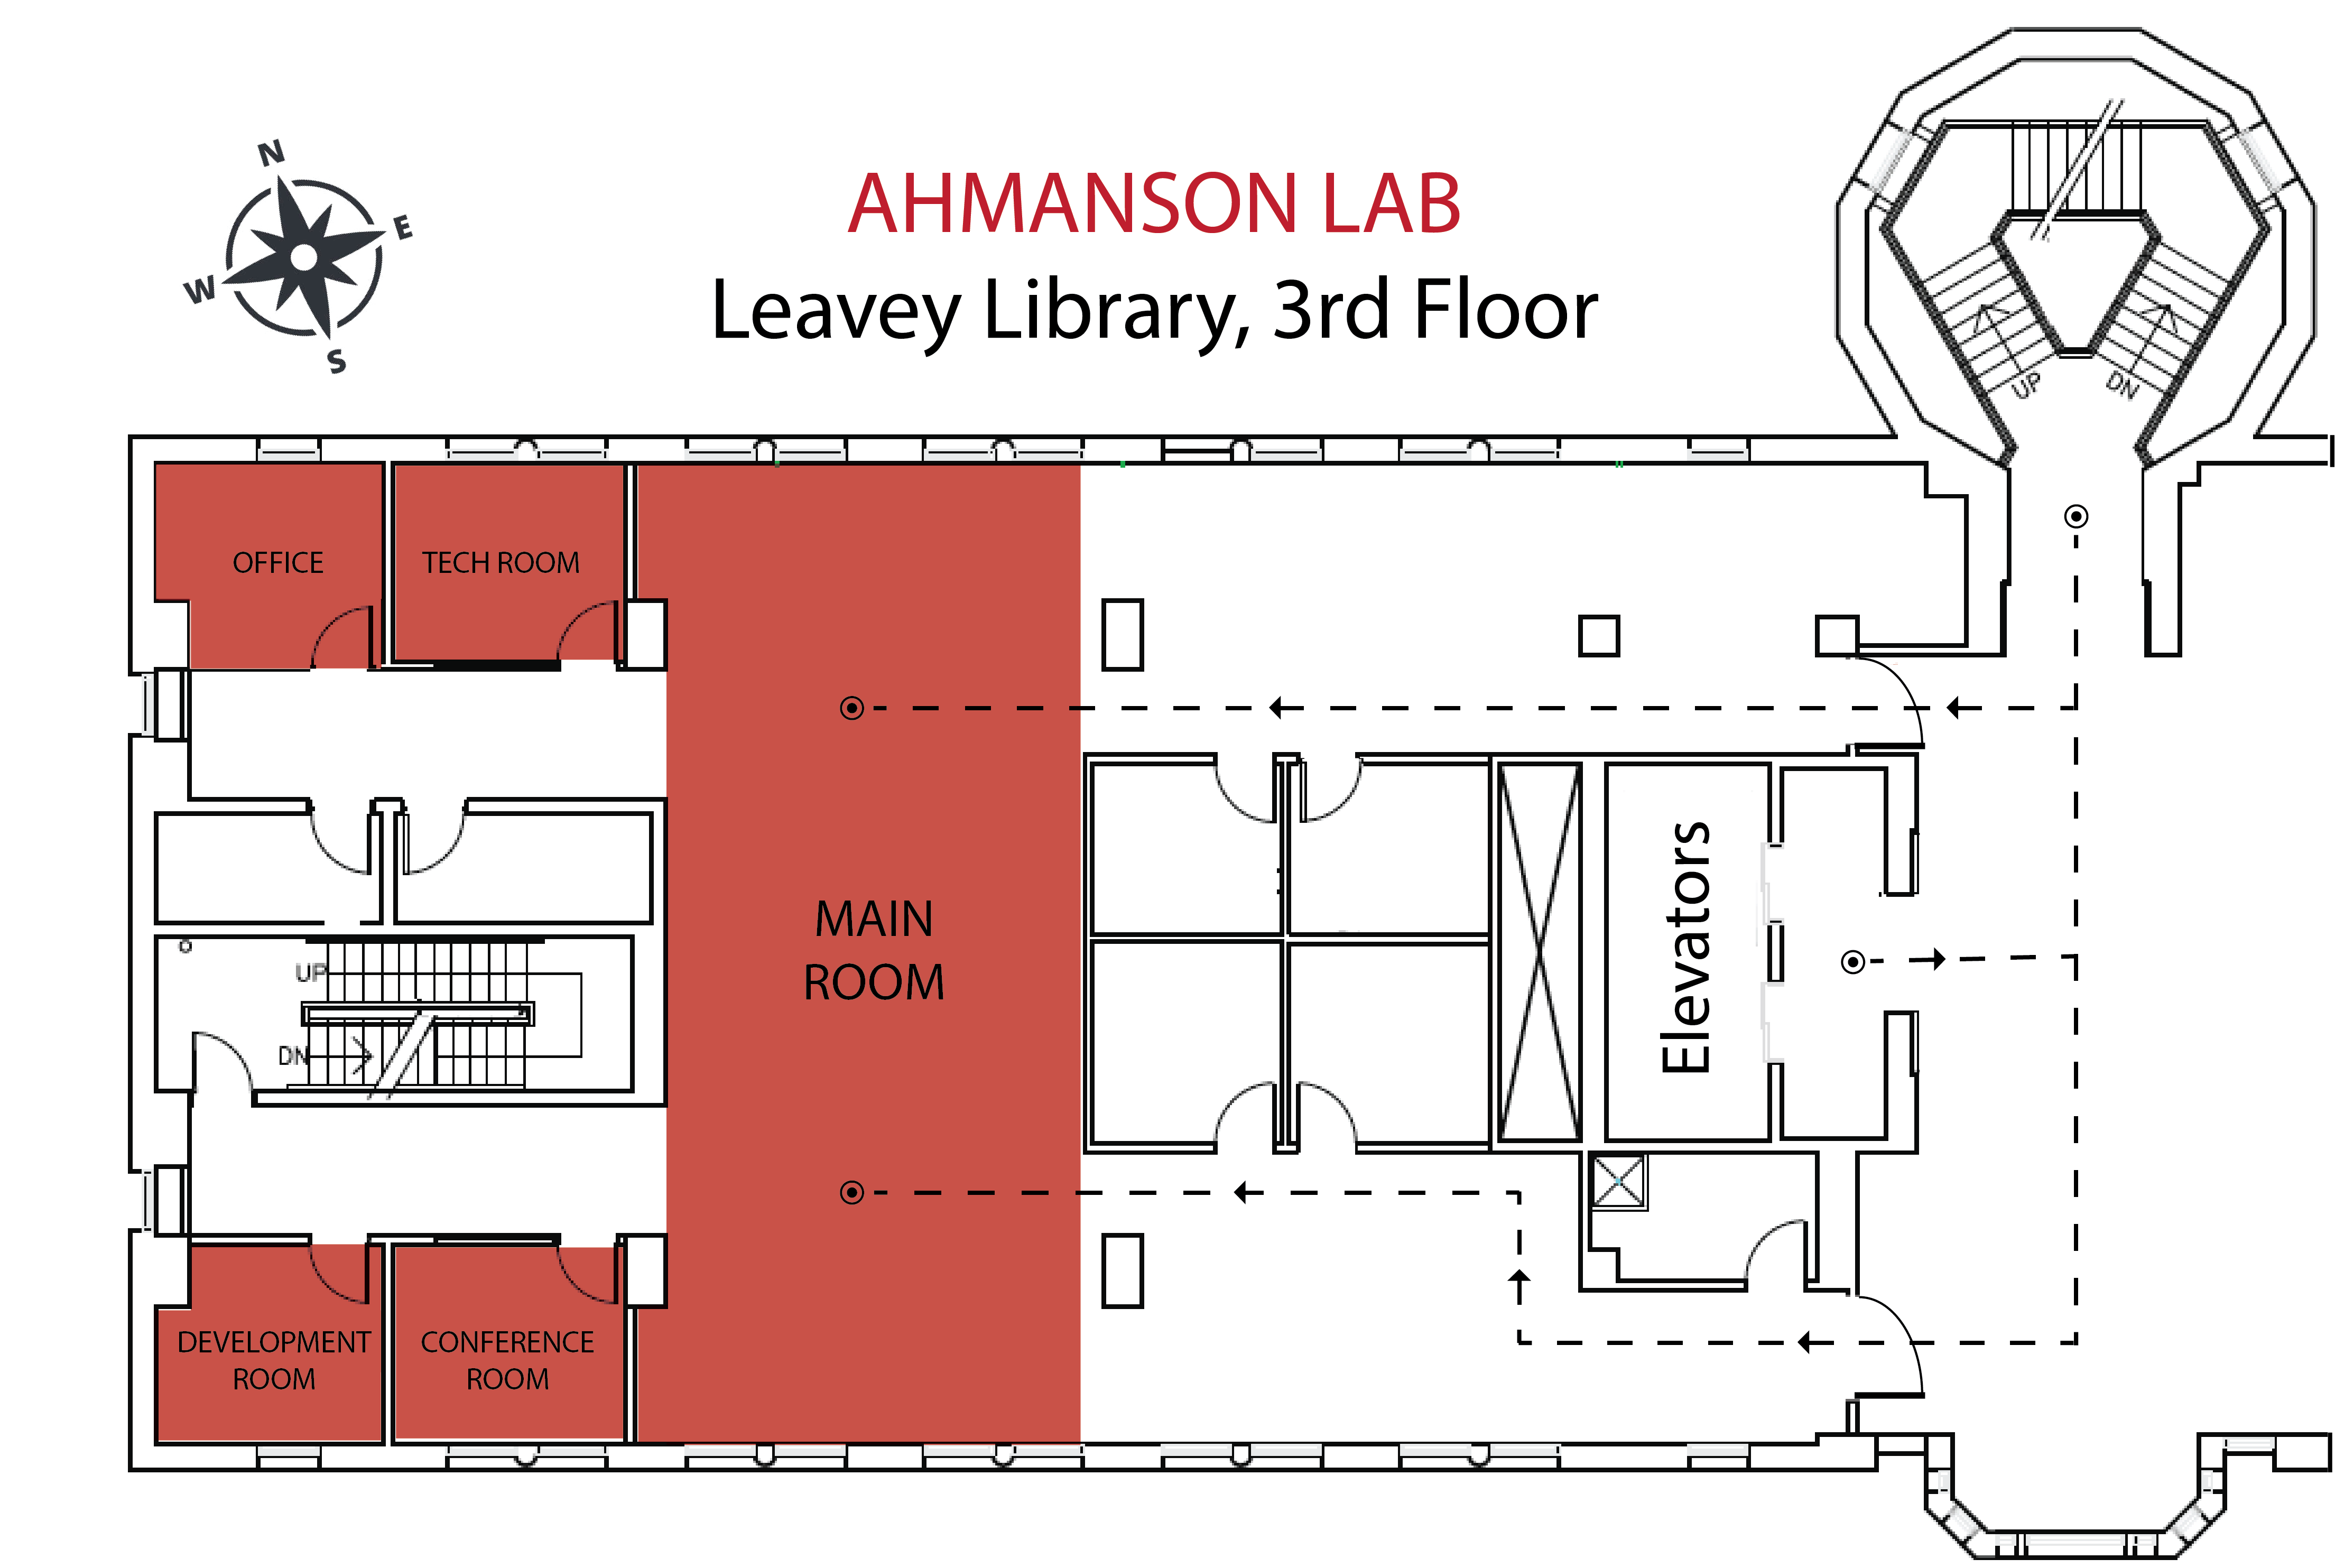 Directions to the Ahmanson Lab